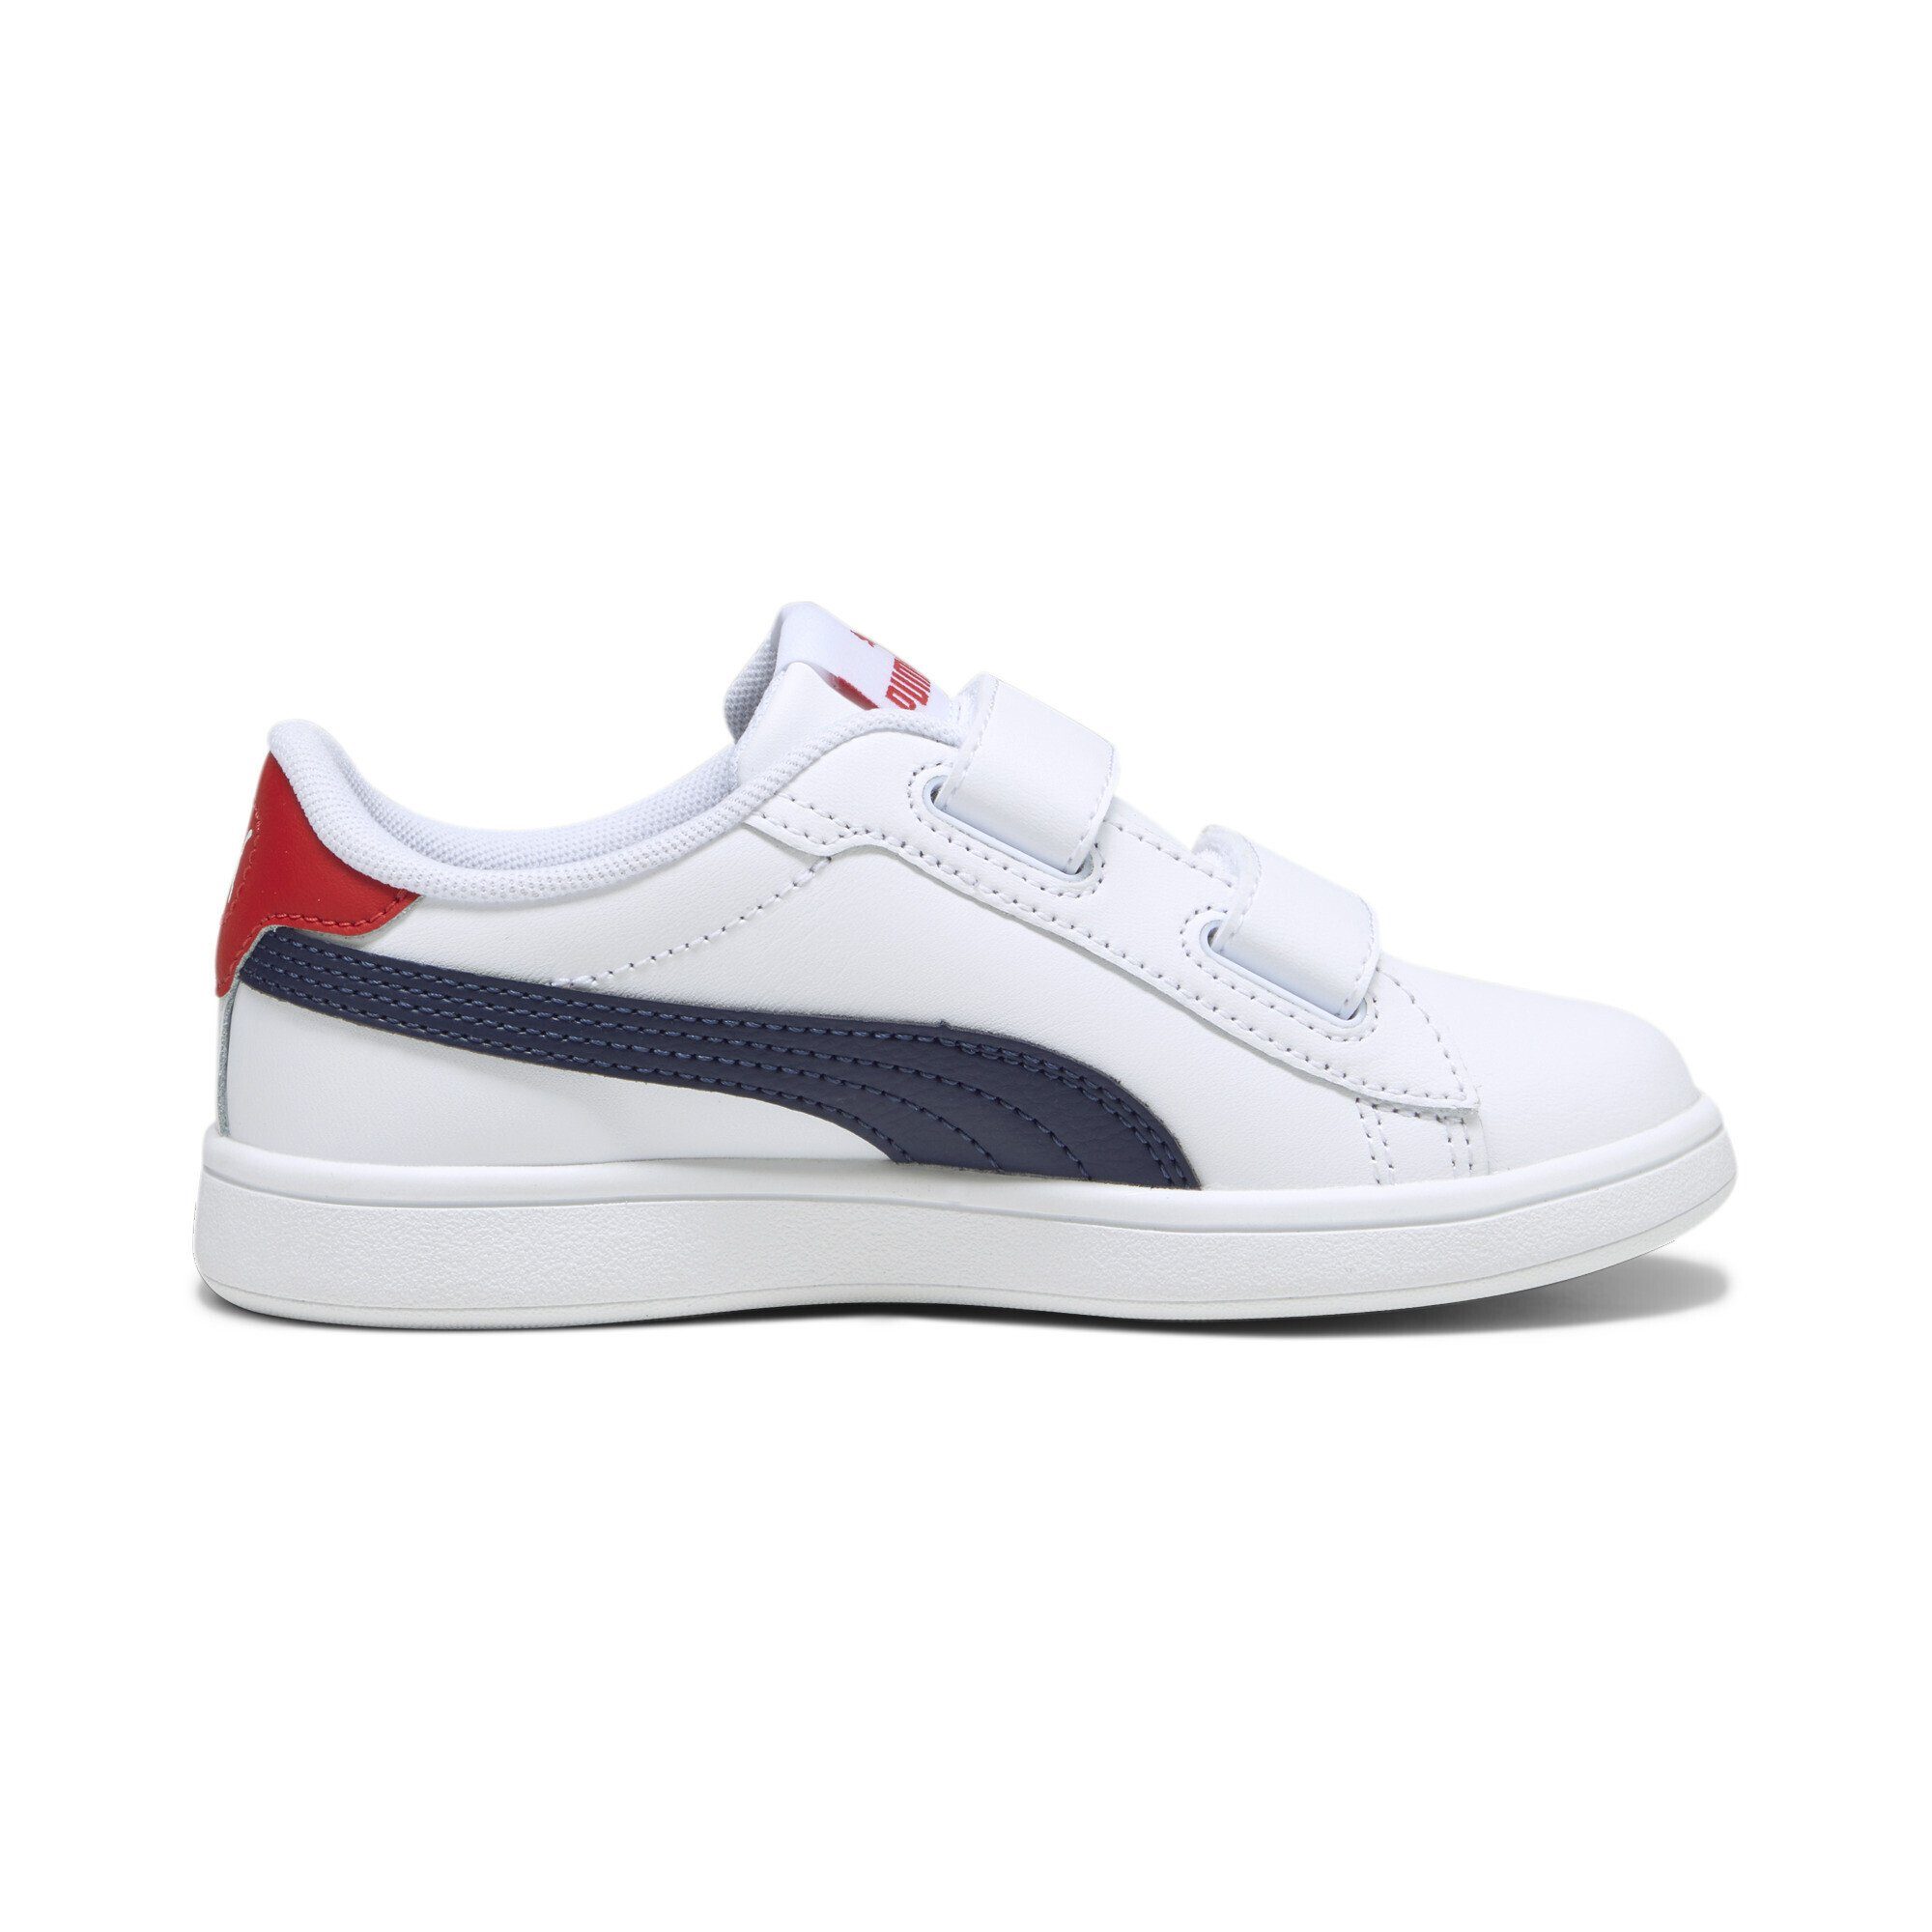 PUMA Smash Navy 3.0 All White Sneakers Blue Leather For Sneaker Time Red